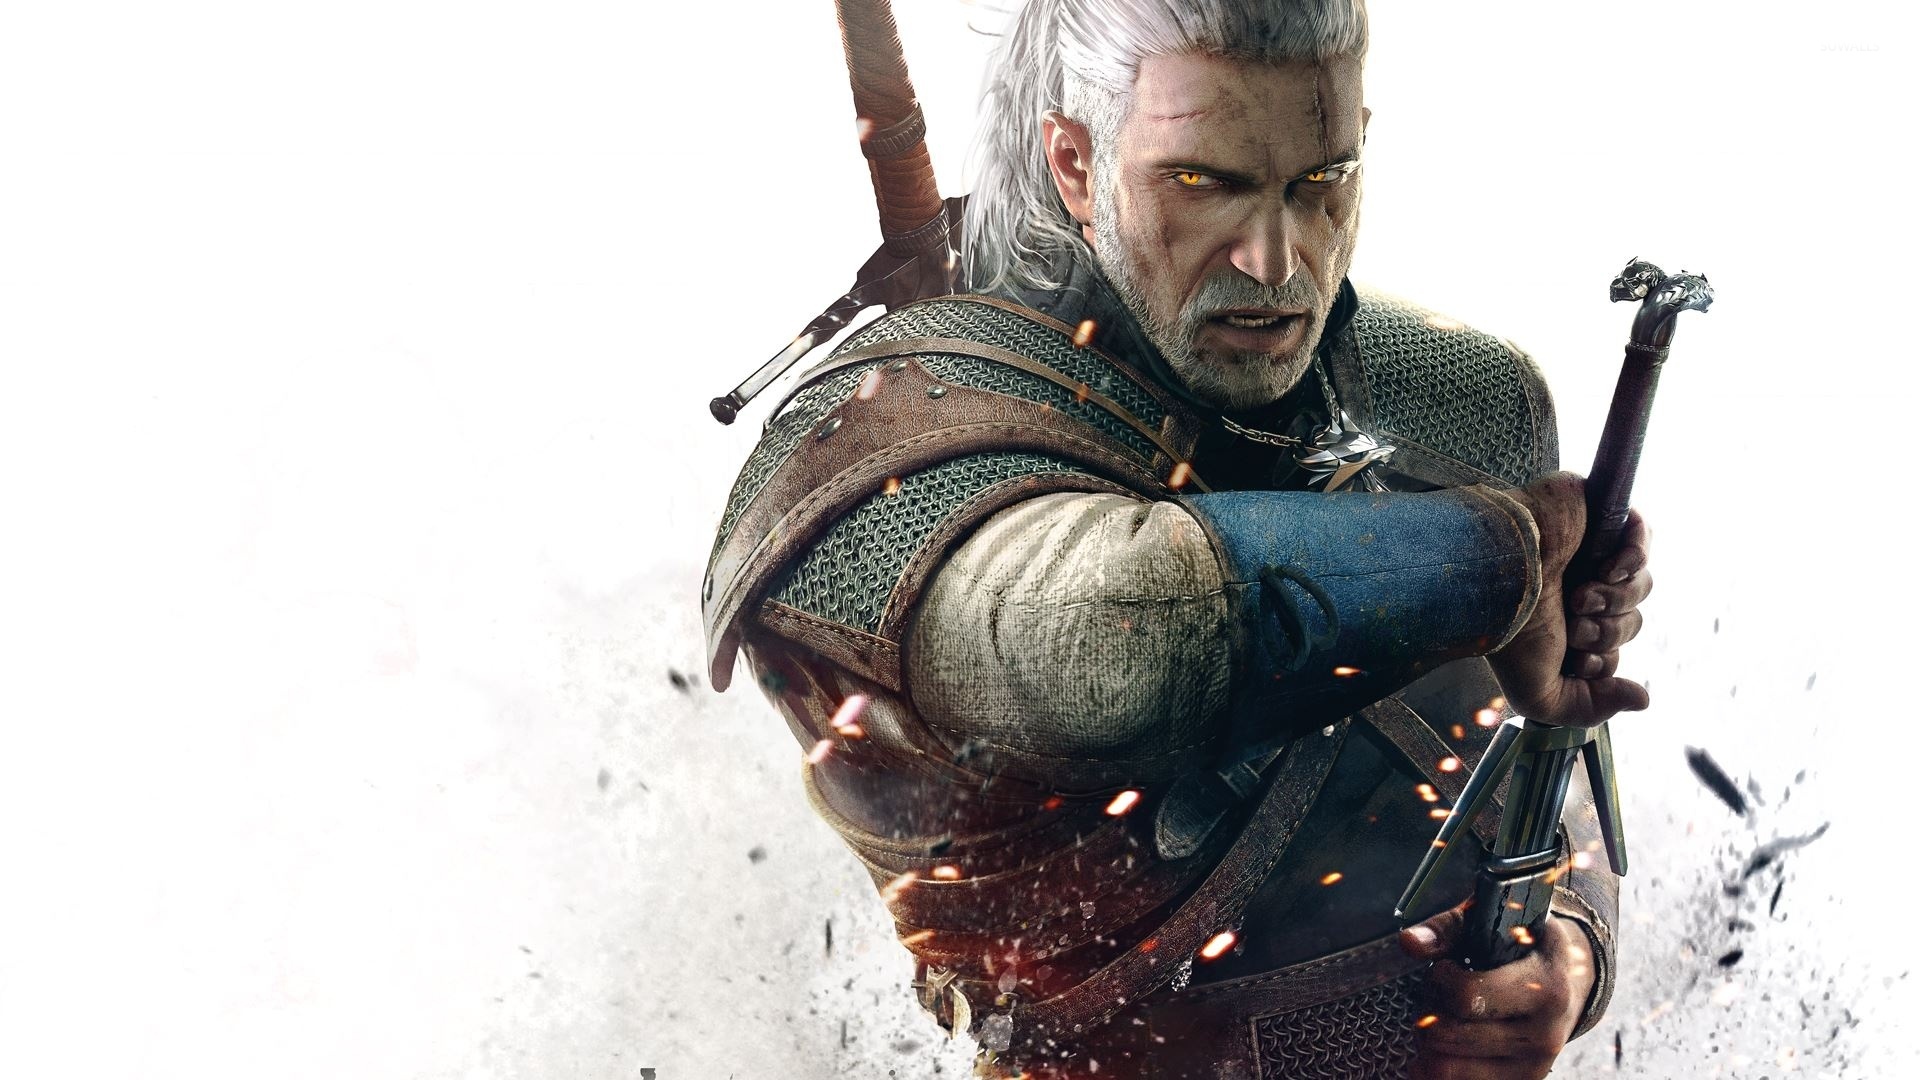 The Witcher 3 Wild Hunt wallpaper   Game wallpapers   31031 1366x768